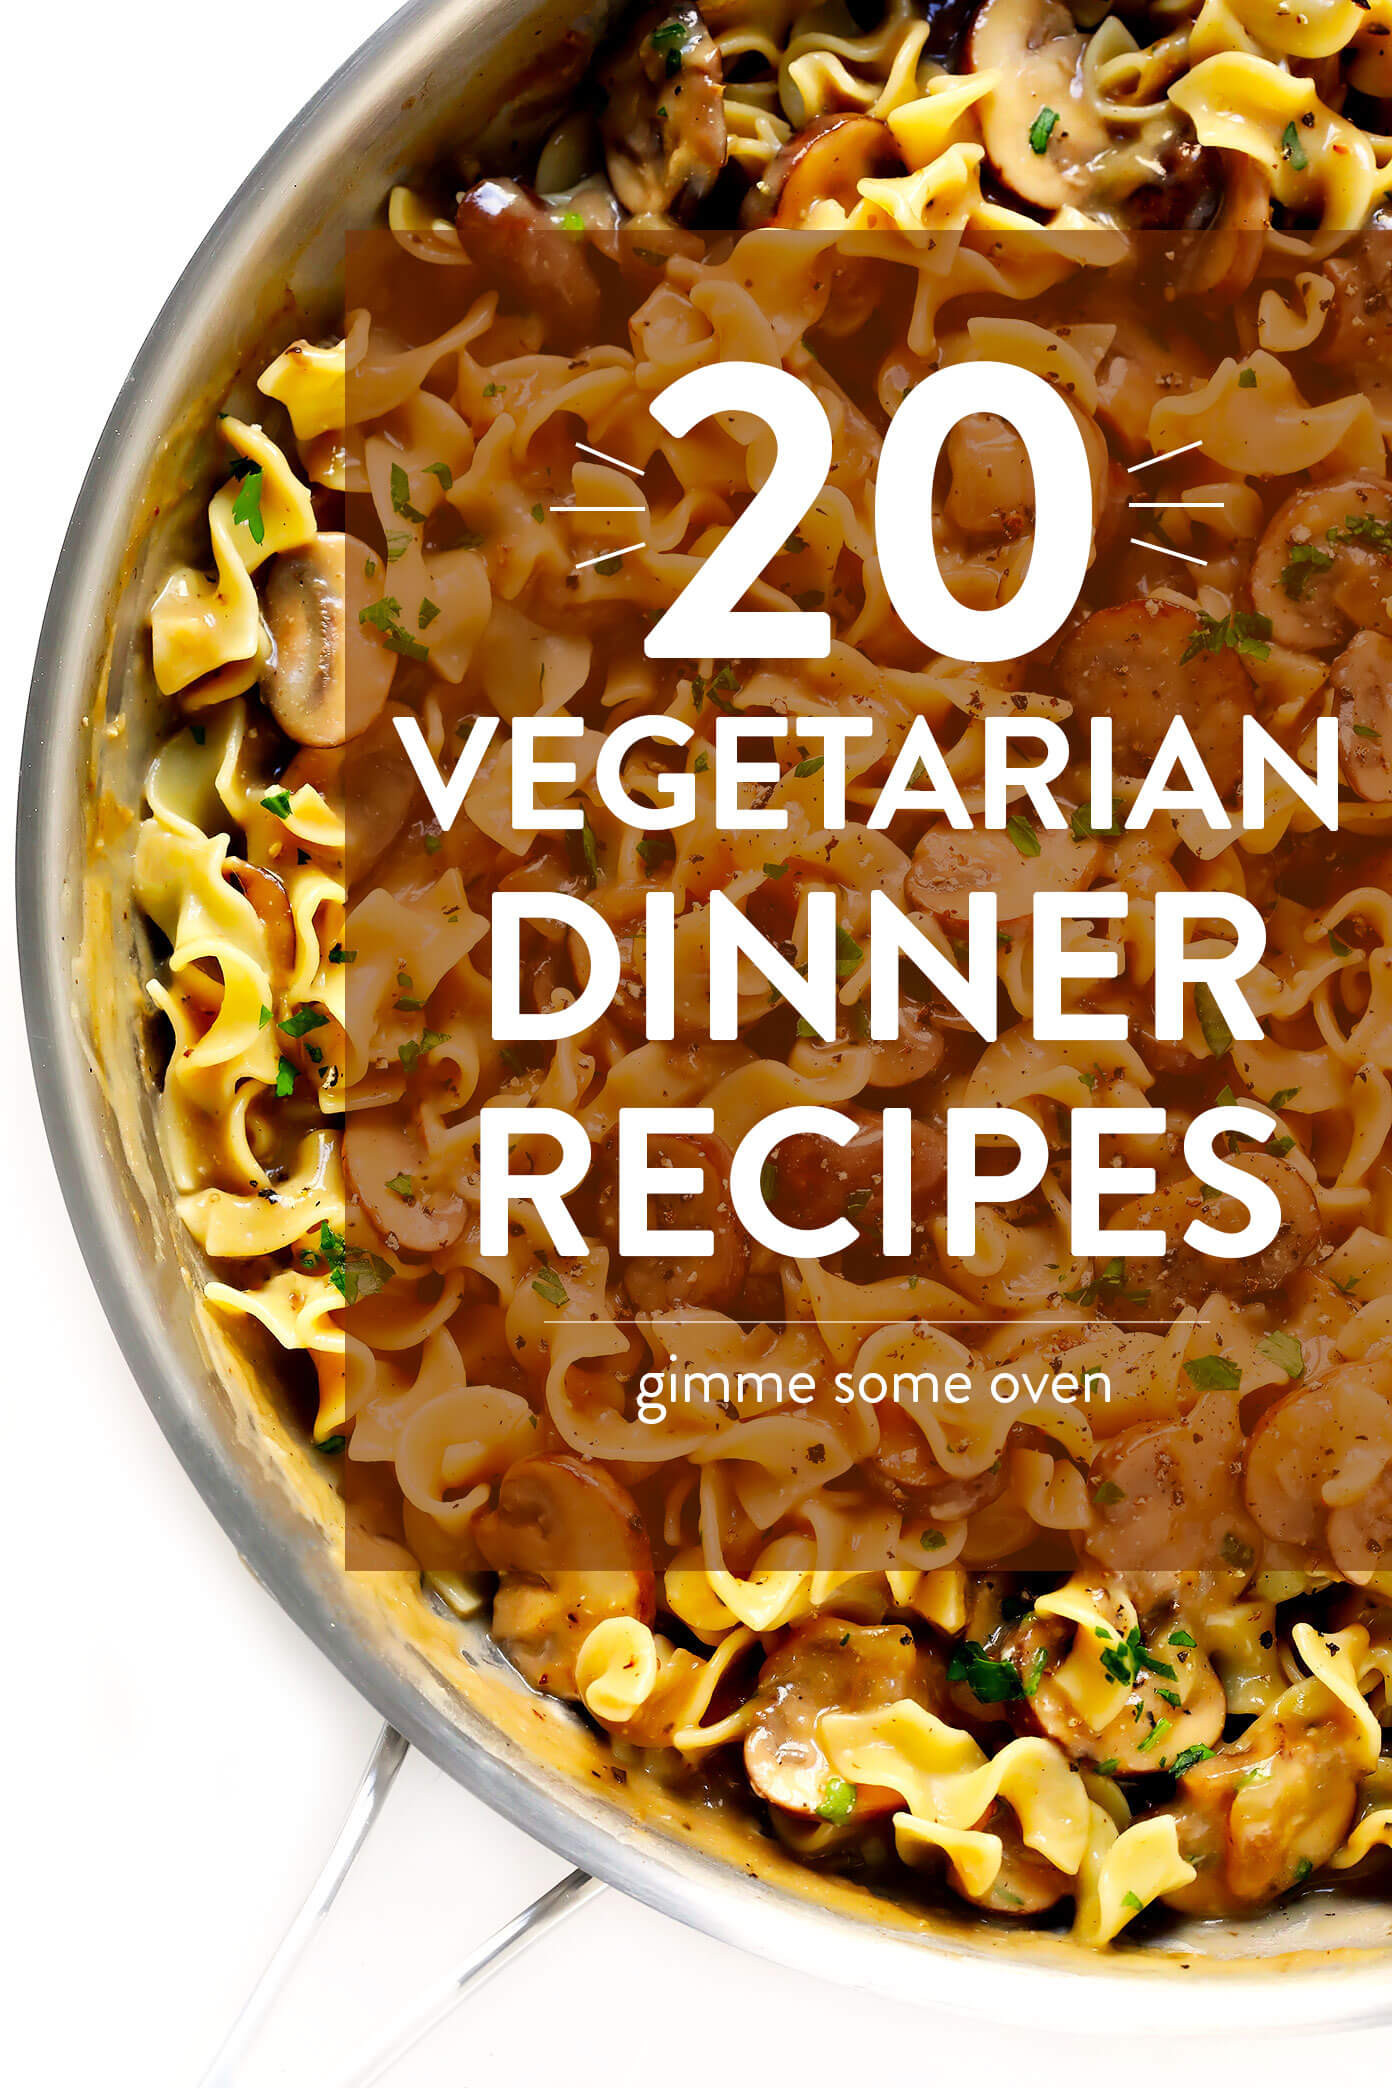 Easy Vegetarian Dinner Recipes
 20 Ve arian Dinner Recipes That Everyone Will LOVE